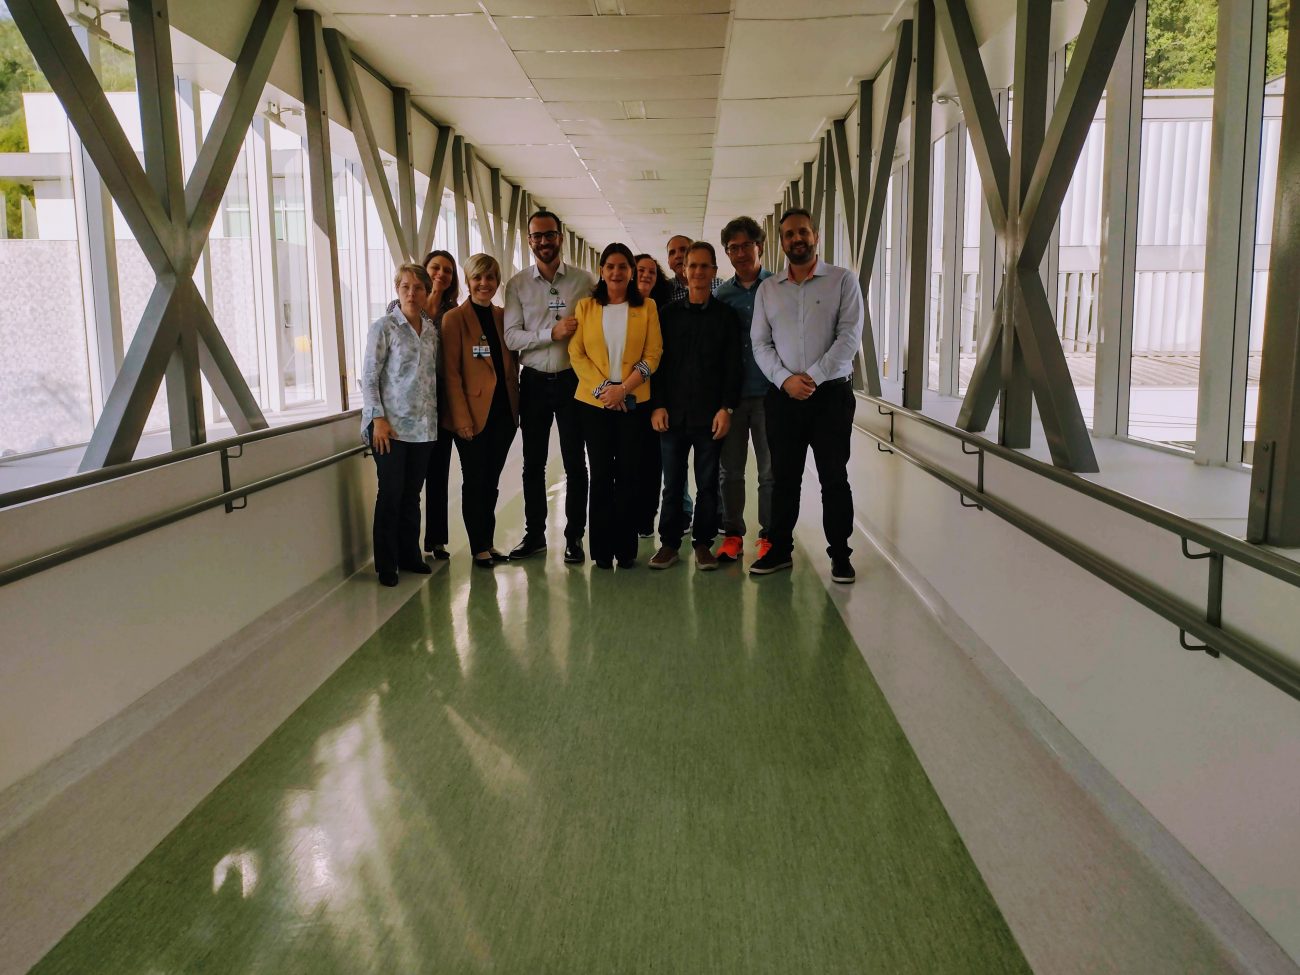 Minister of Health's agenda included visits to city hospitals and discussion of Santa Catarina's hospital policy - Secom/Governo de Santa Catarina/Disclosure/ND